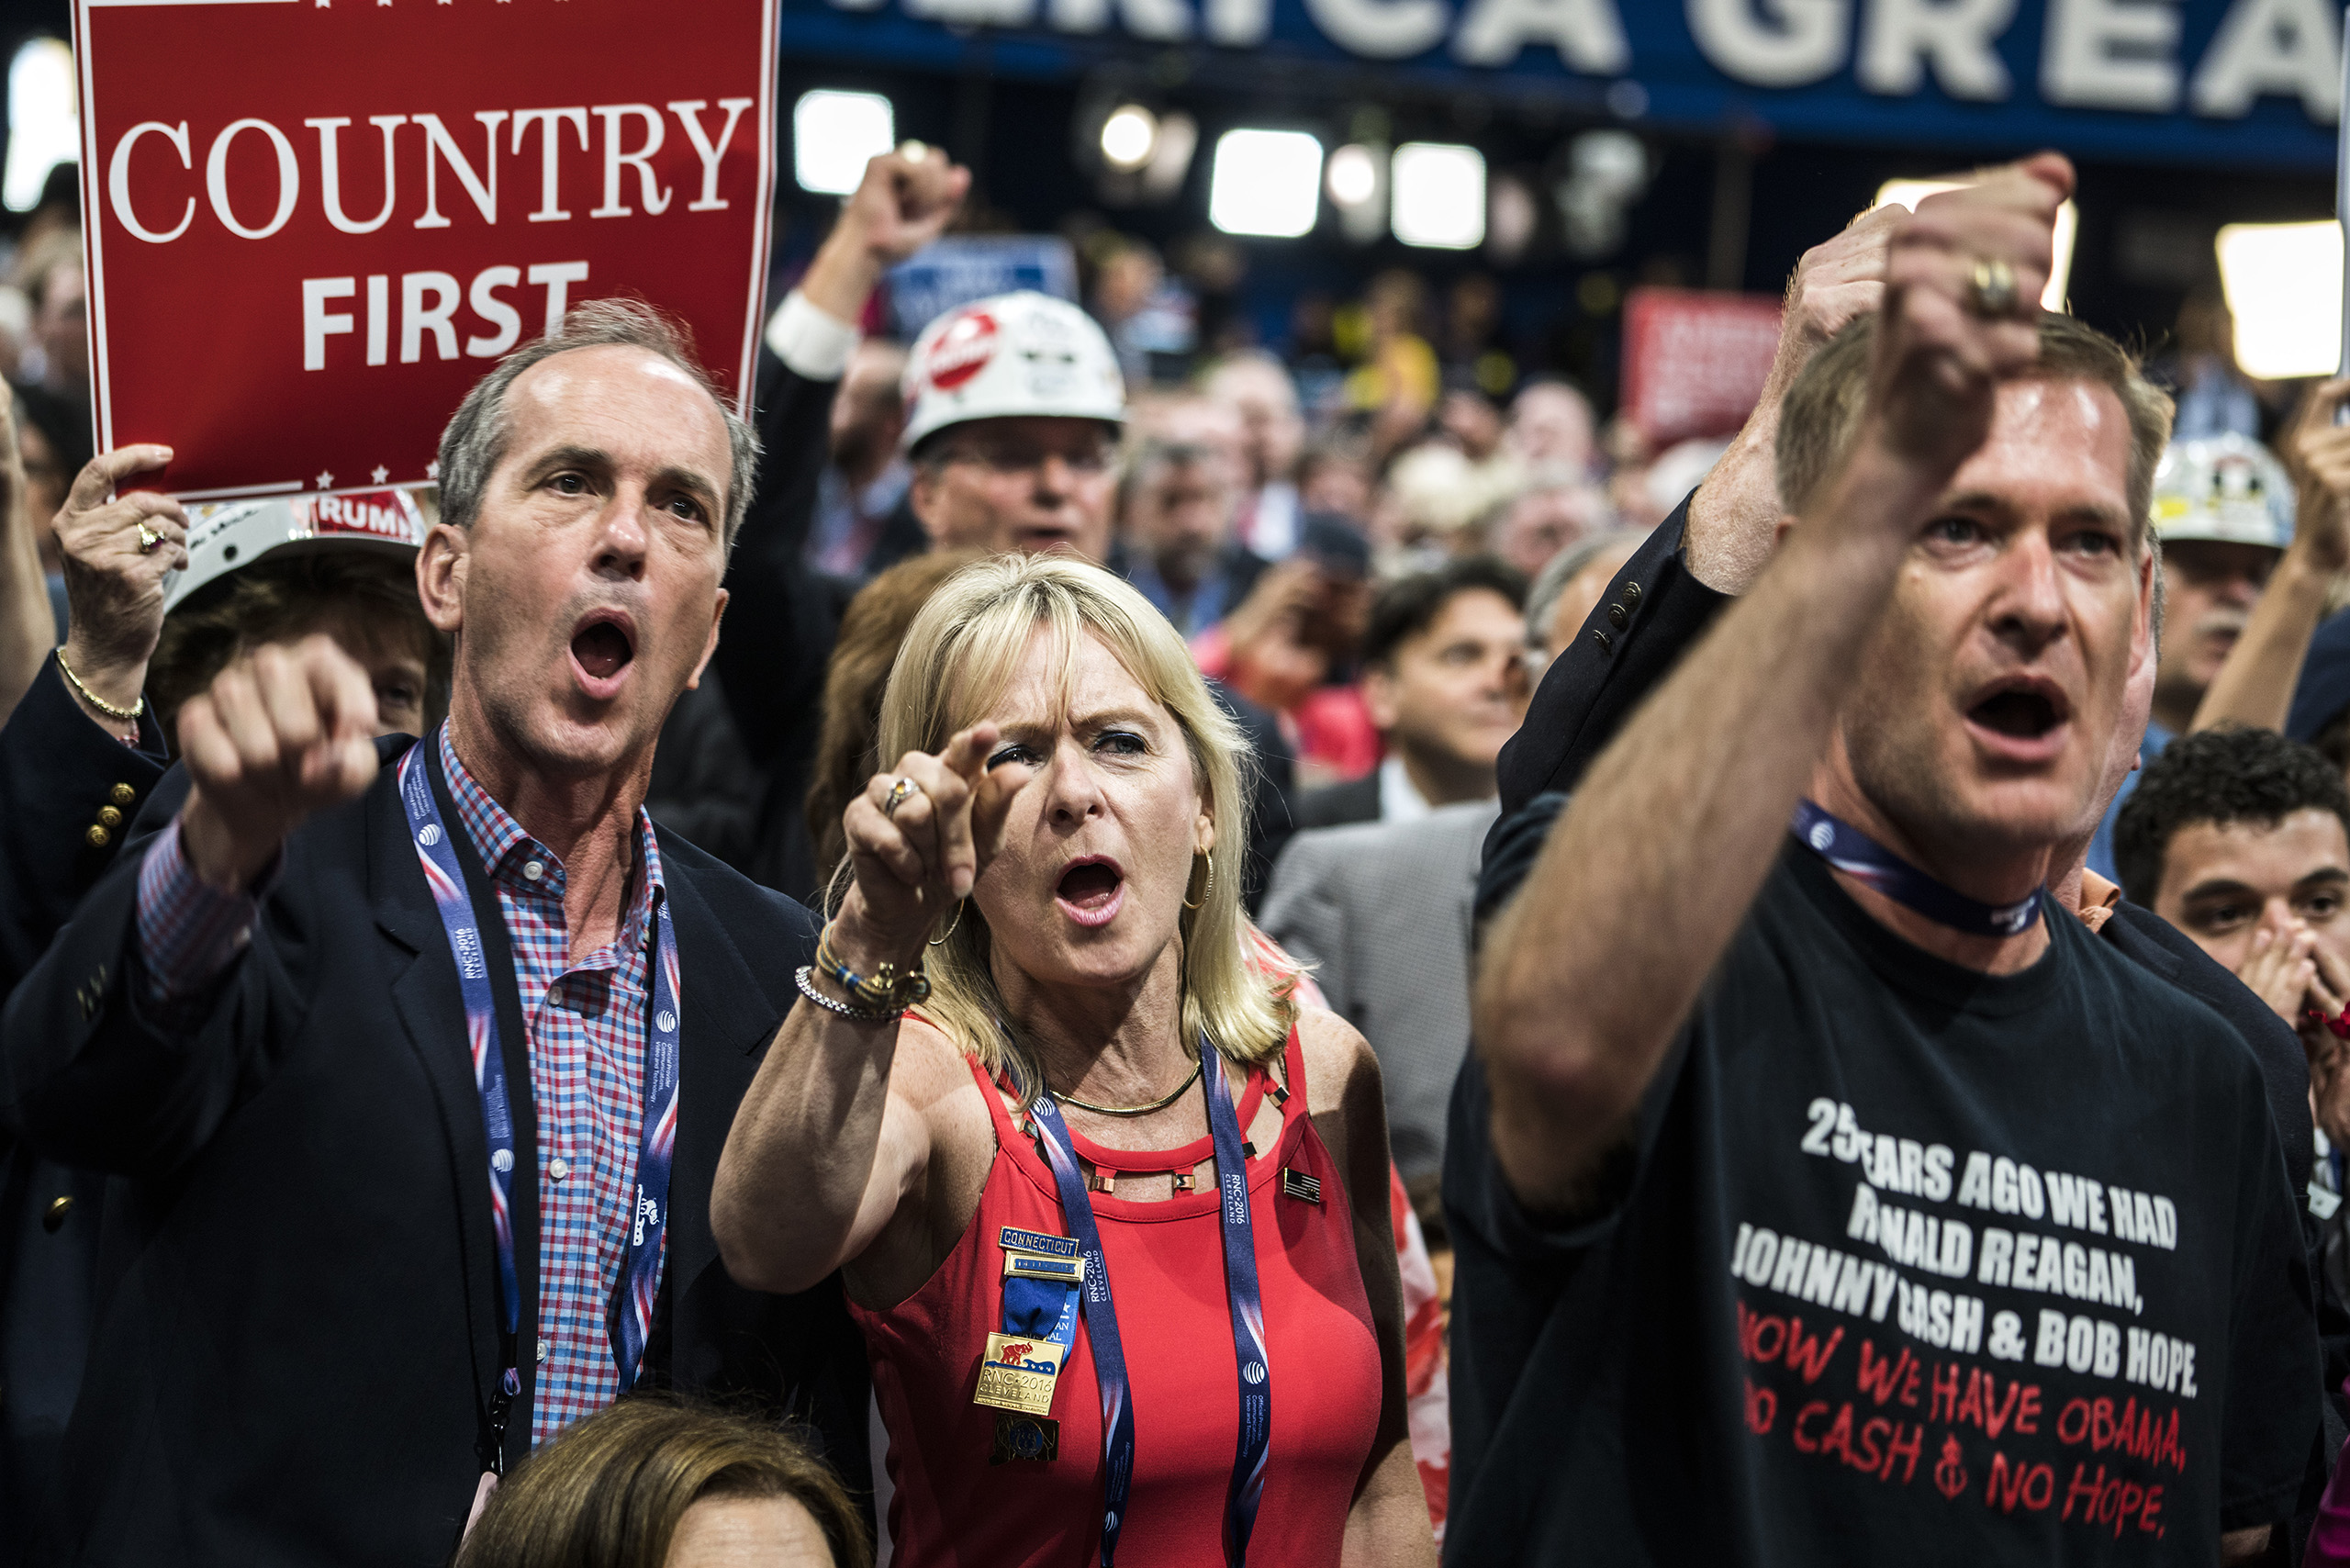 Delegates react to Ted Cruz during his contoversial speech where he refused to endorse presidential candidate Donald Trump on July 20, 2016, at the Quicken Loans Arena in Cleveland, Ohio. (Ben Lowy for TIME)